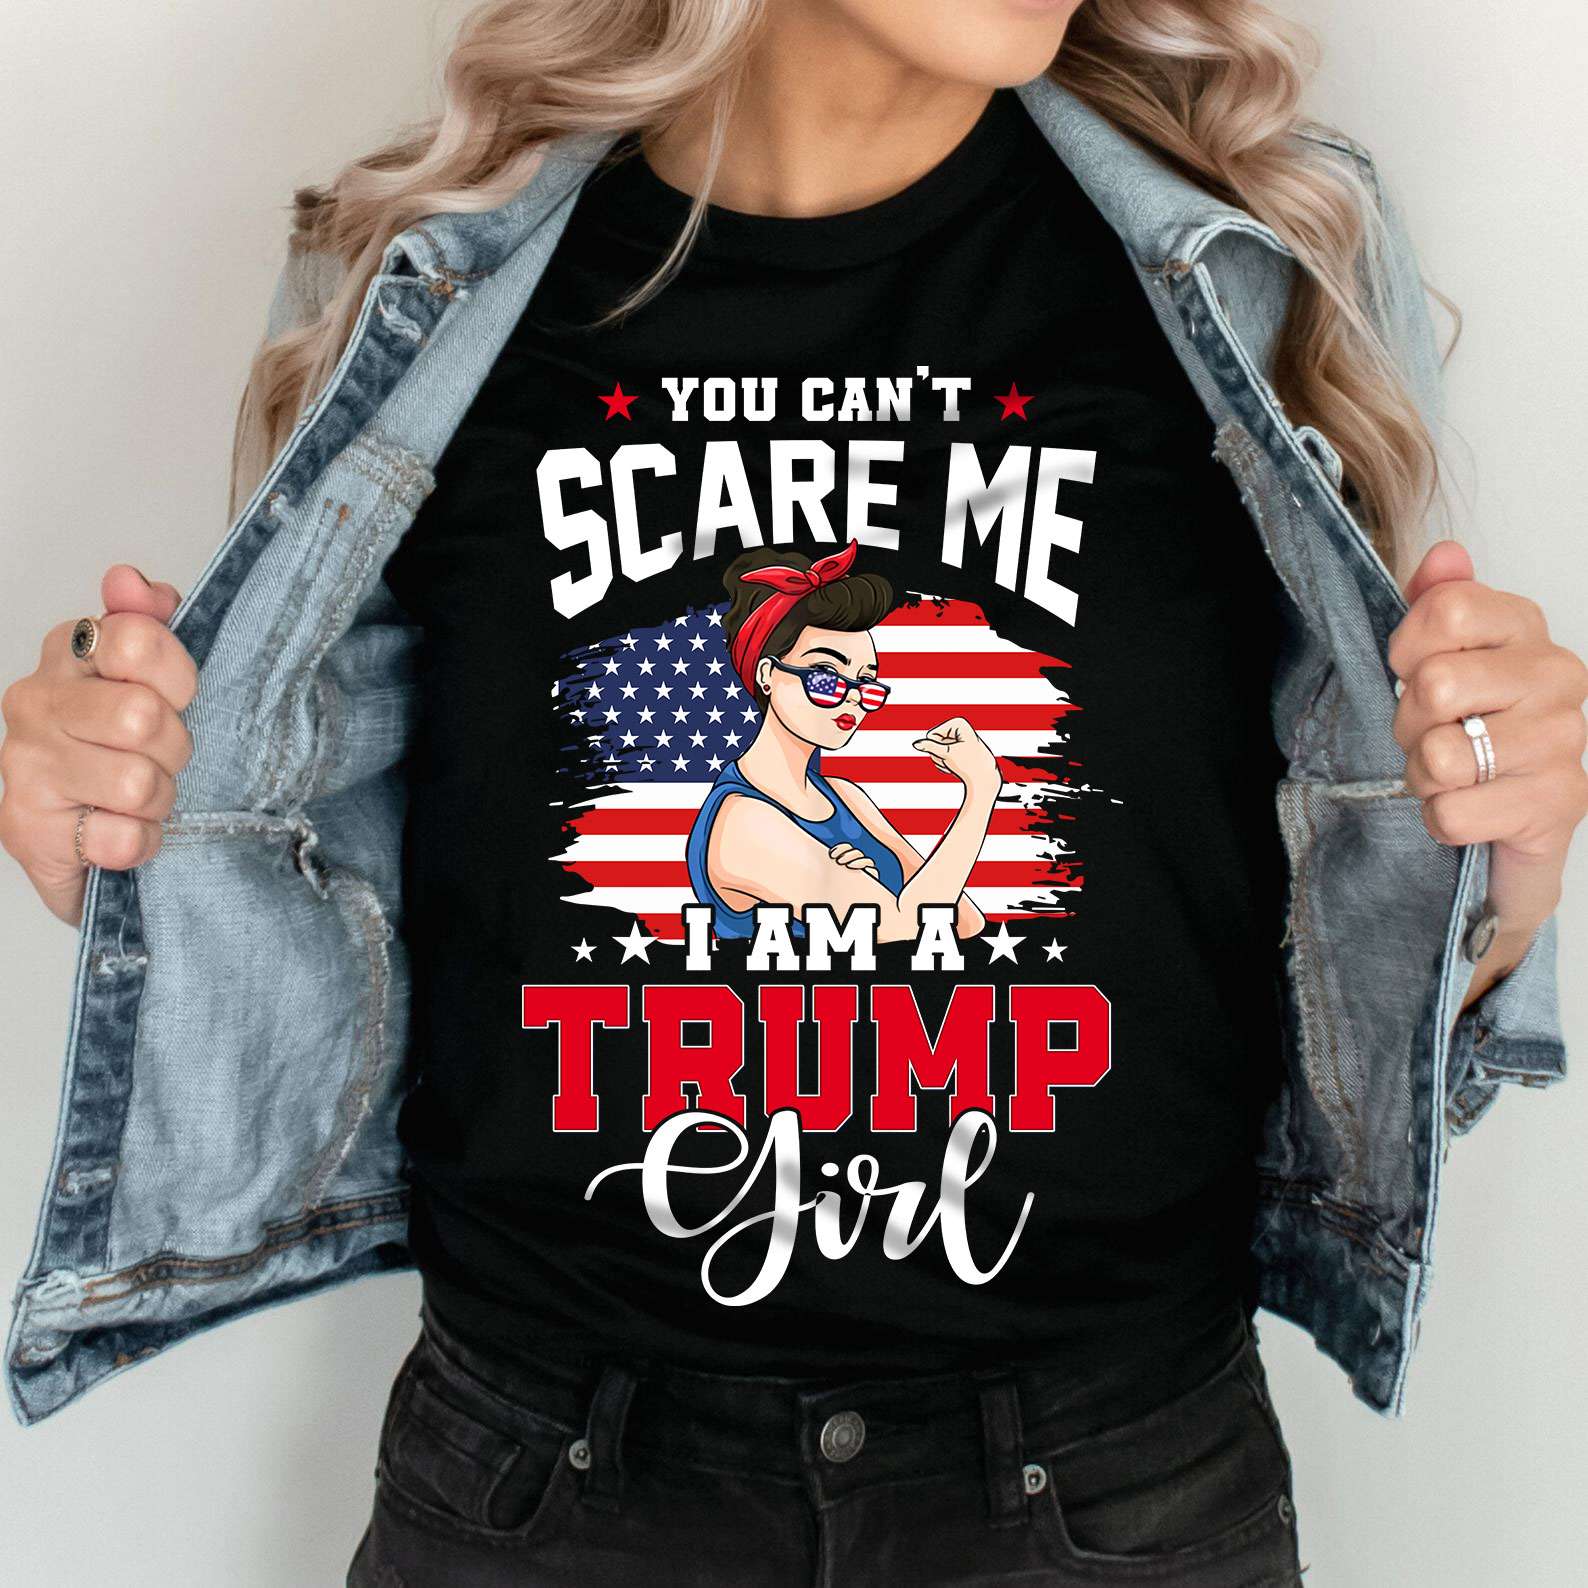 You can't scare me I am a Trump girl - Trump girl supporters